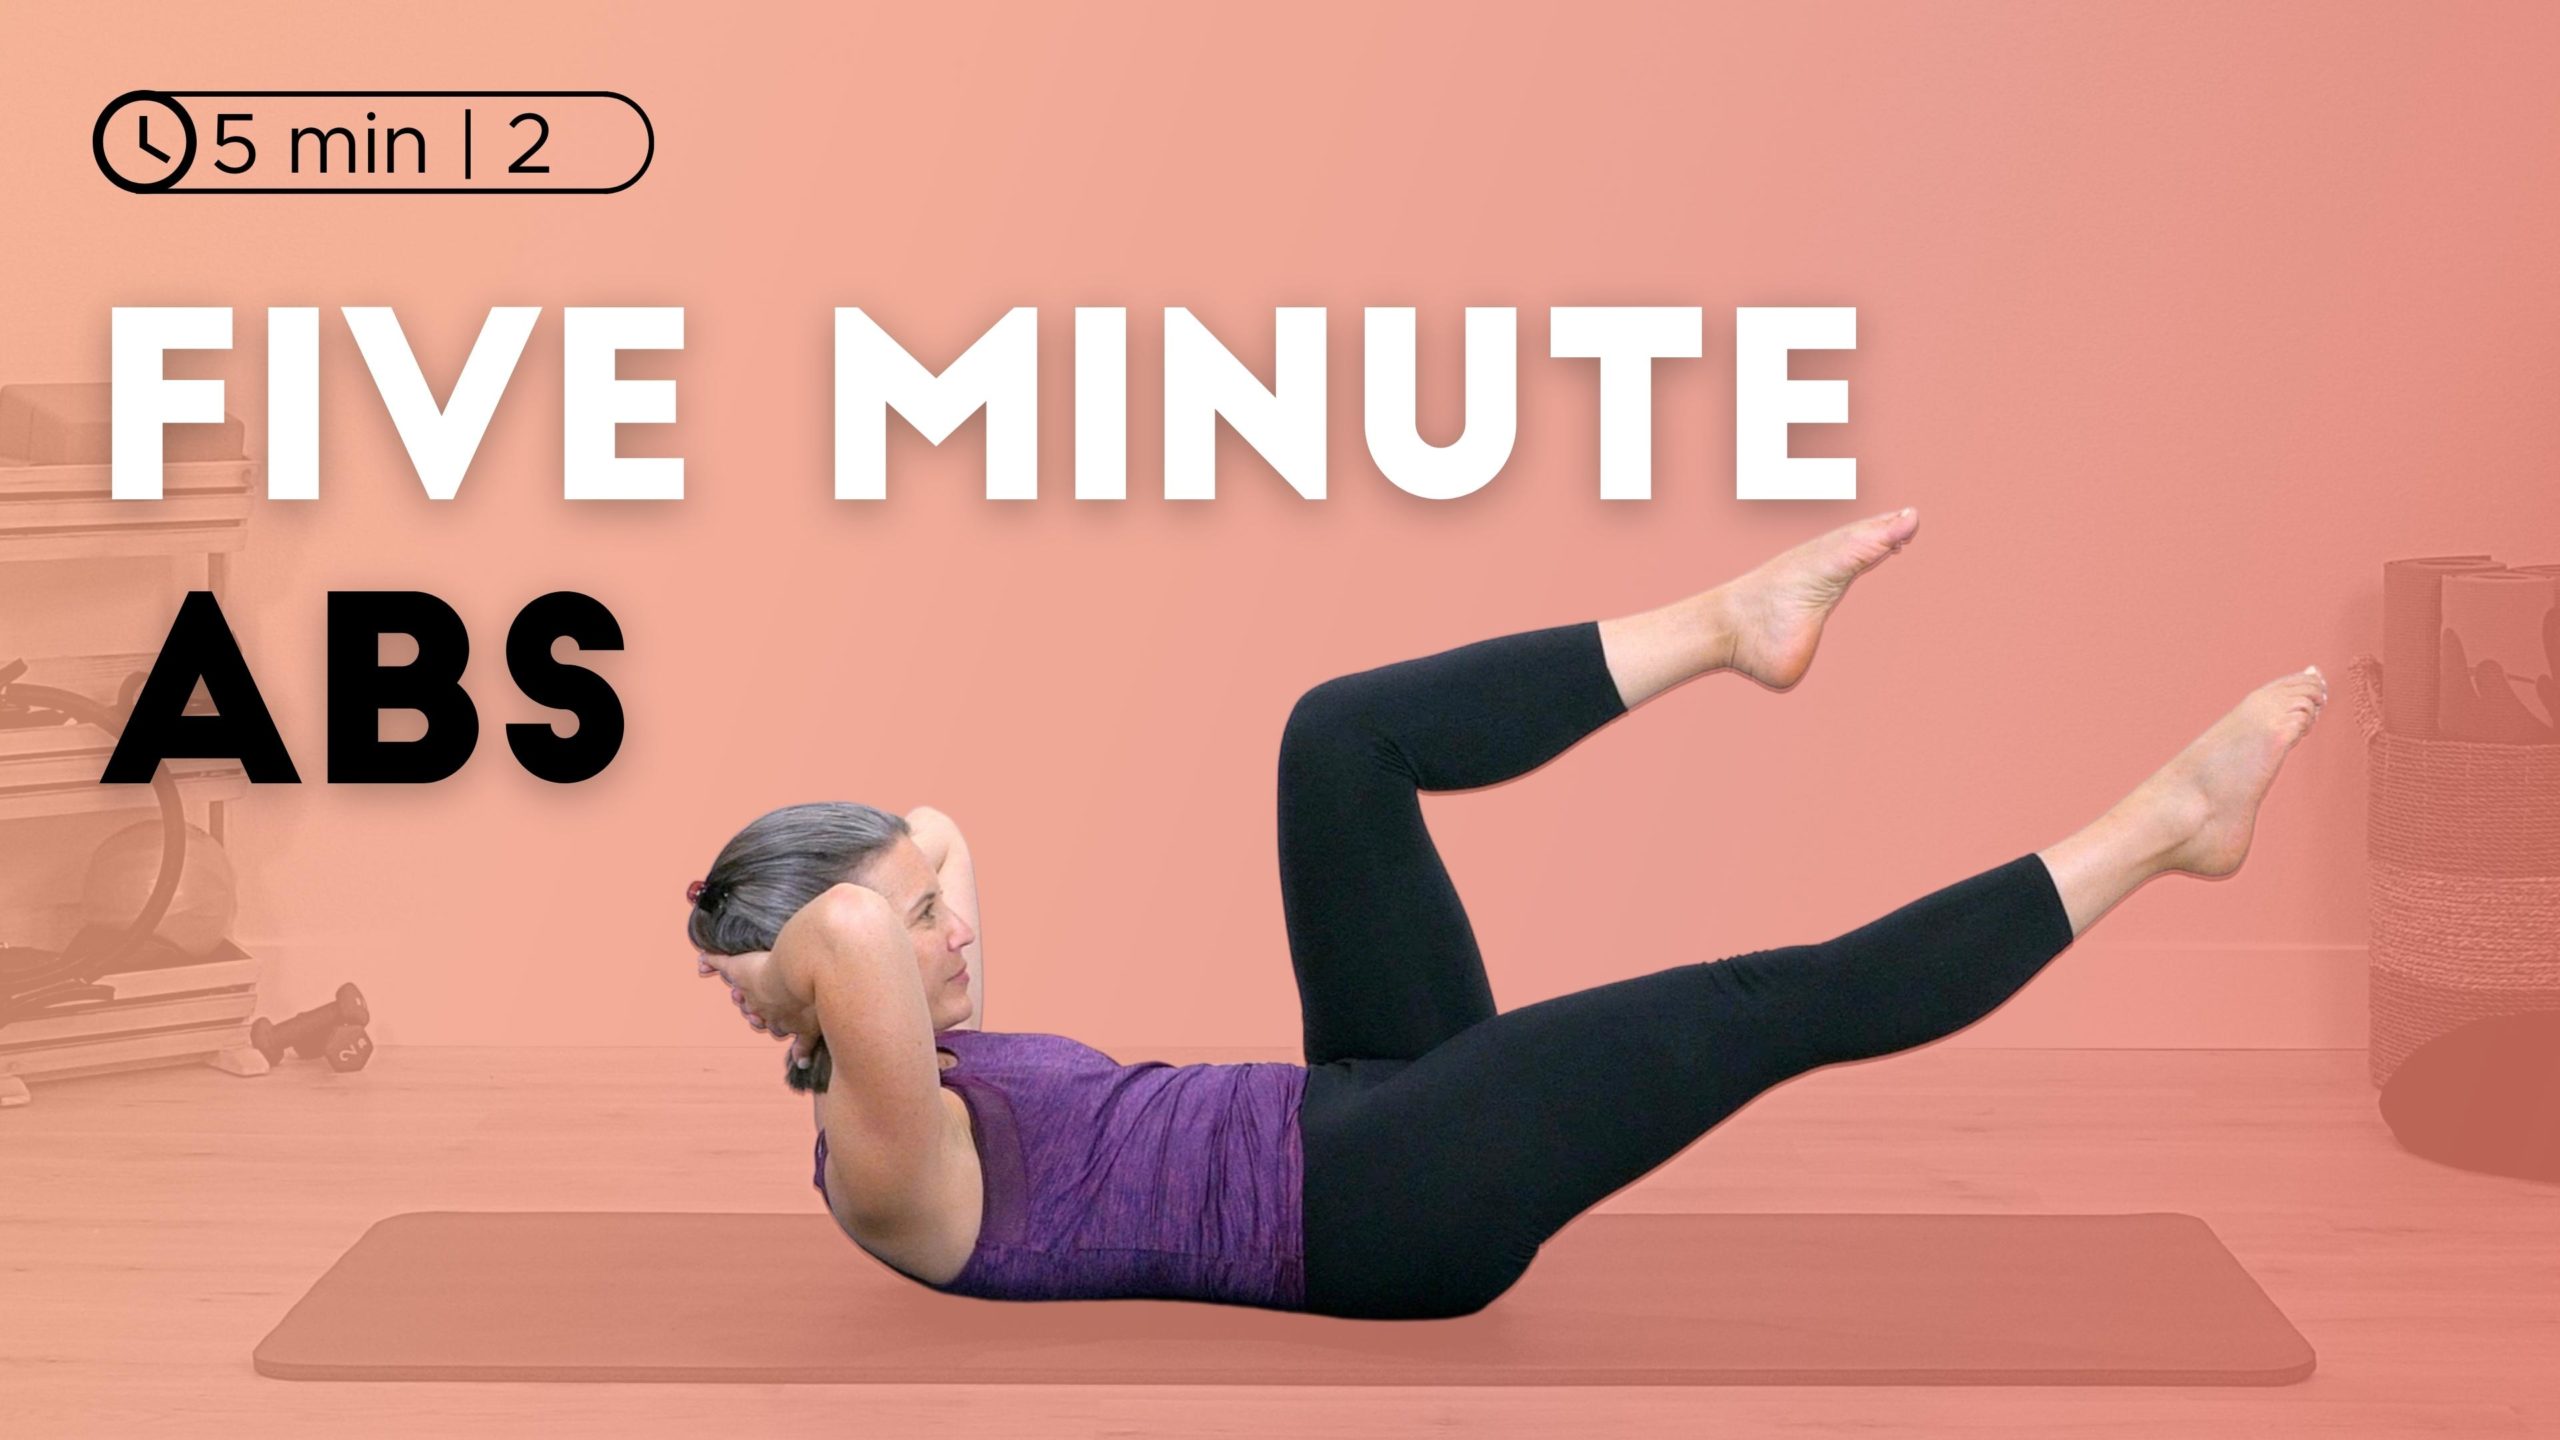 Five Minute Abs